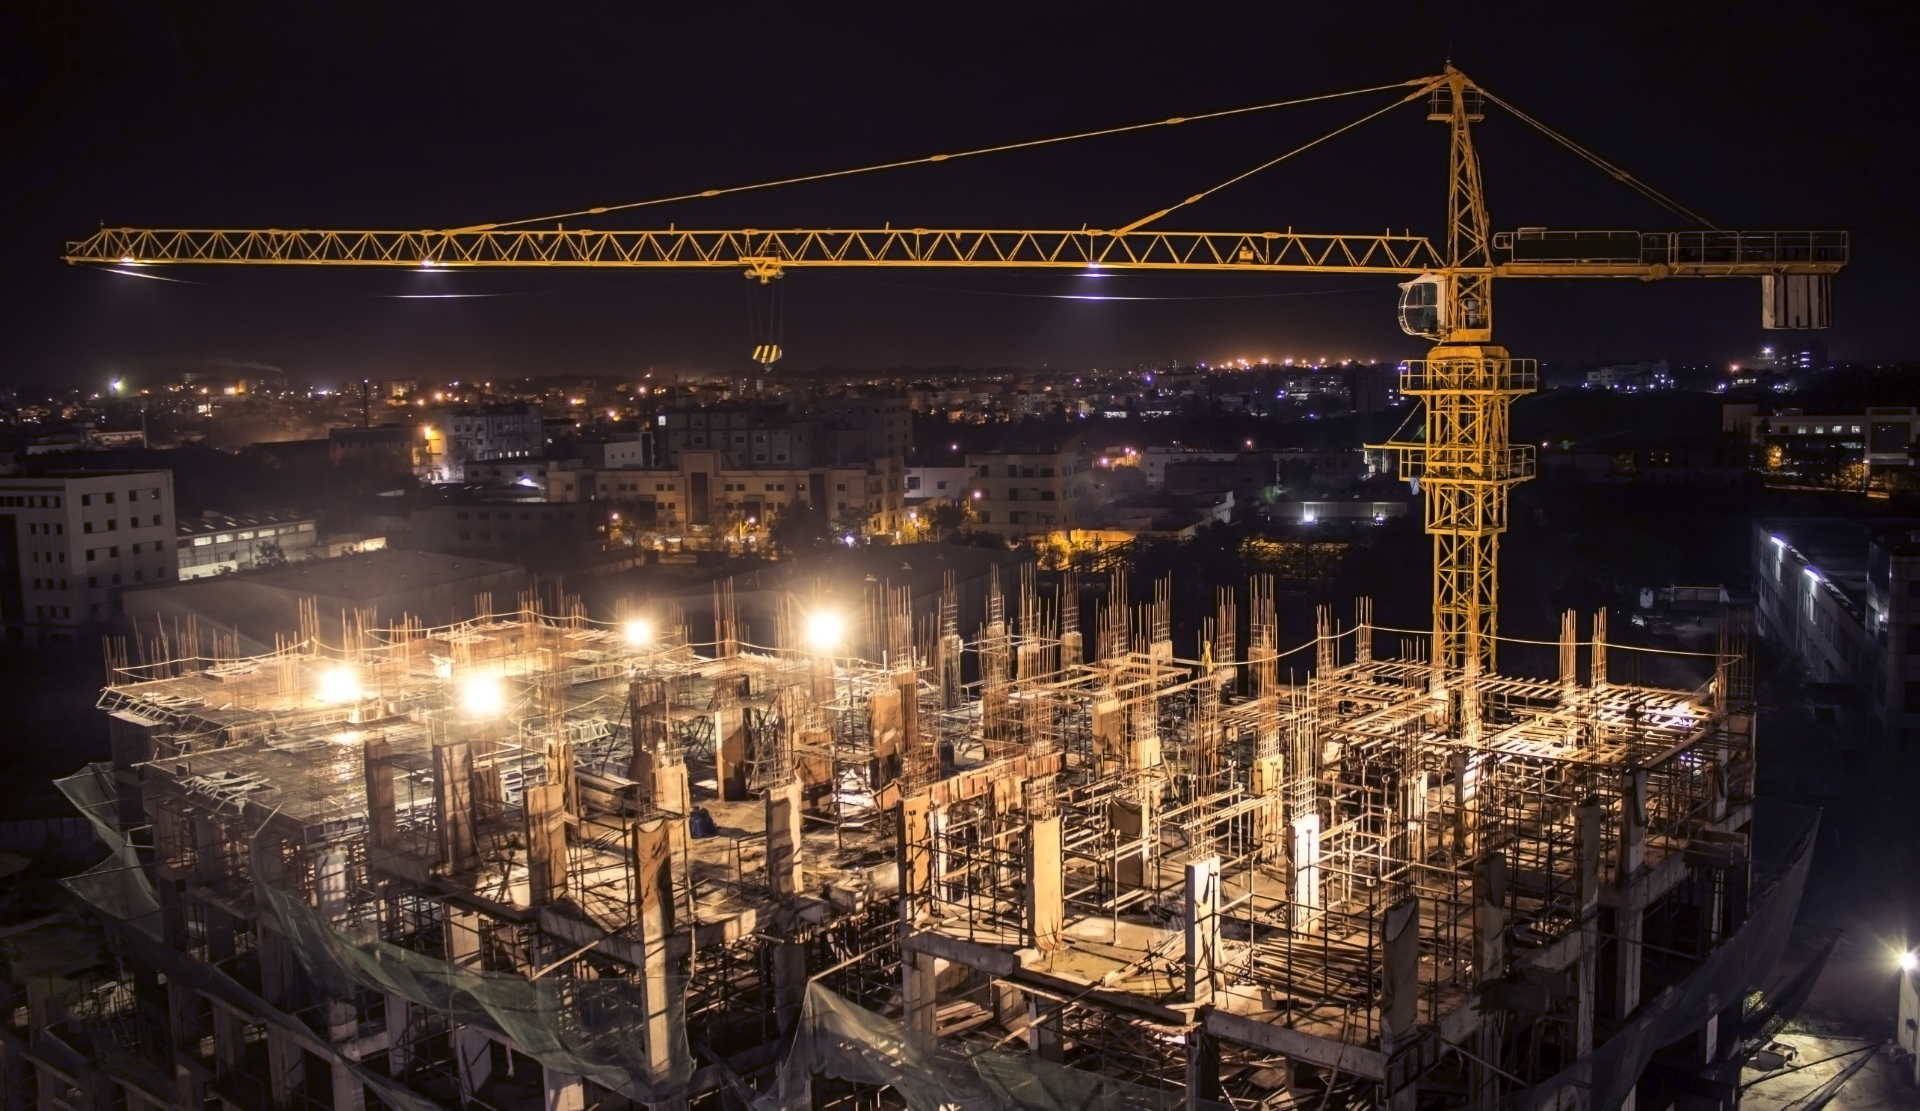 ConsTrack is a ground-breaking new satellite-based economic information service for monitoring the status of the construction sector (Photo credit: Siddharth Bajpai/Shutterstock) 